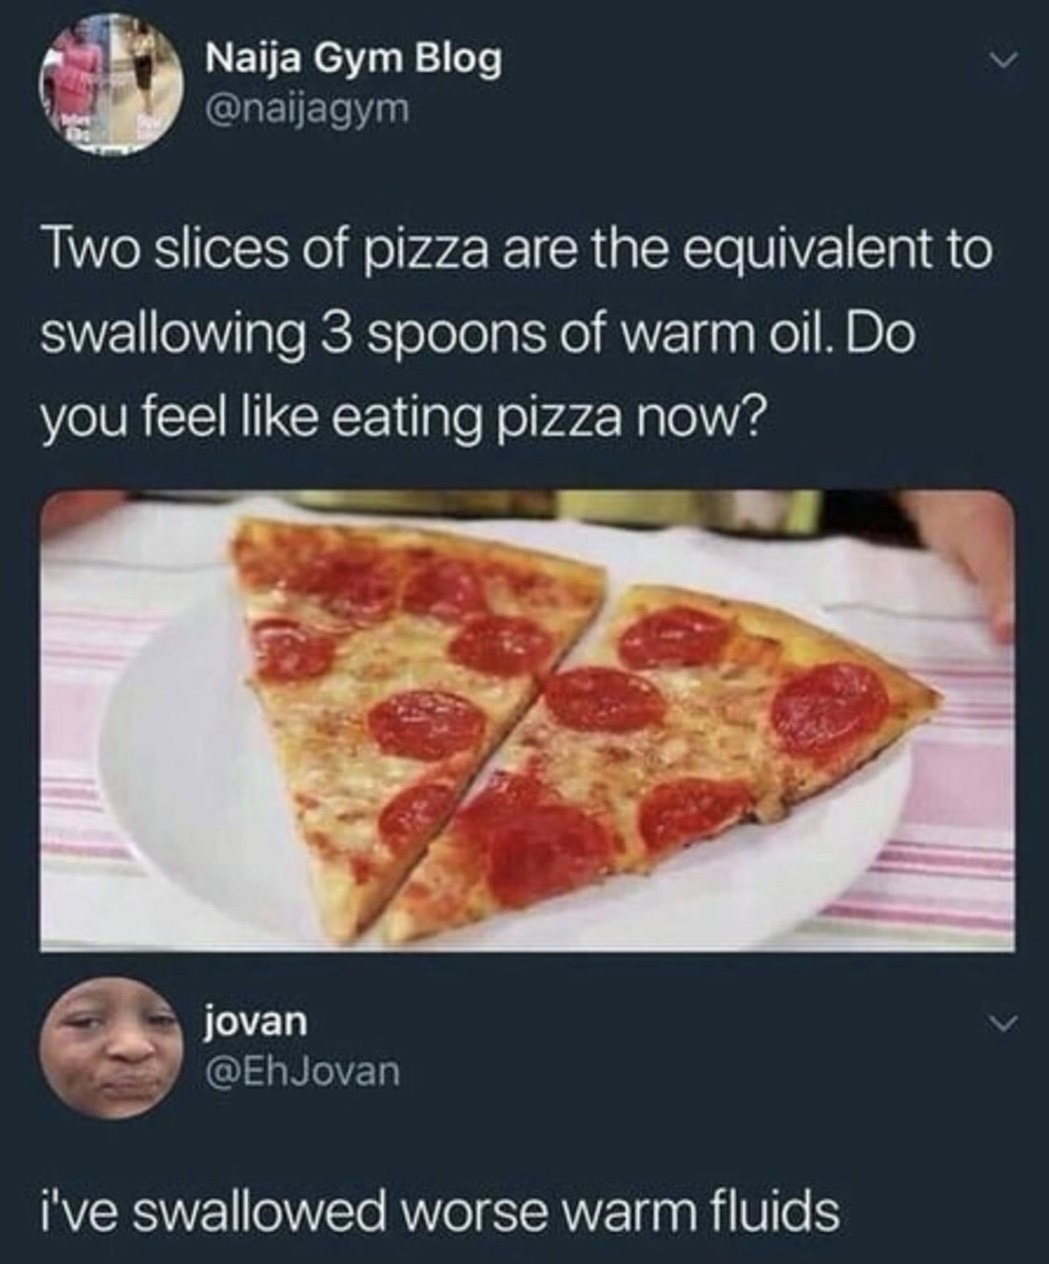 Meme trying to scare people from eating pizza as way of highlighting the oil content and someone chimes in and points out they have swallowed much worse warm liquids